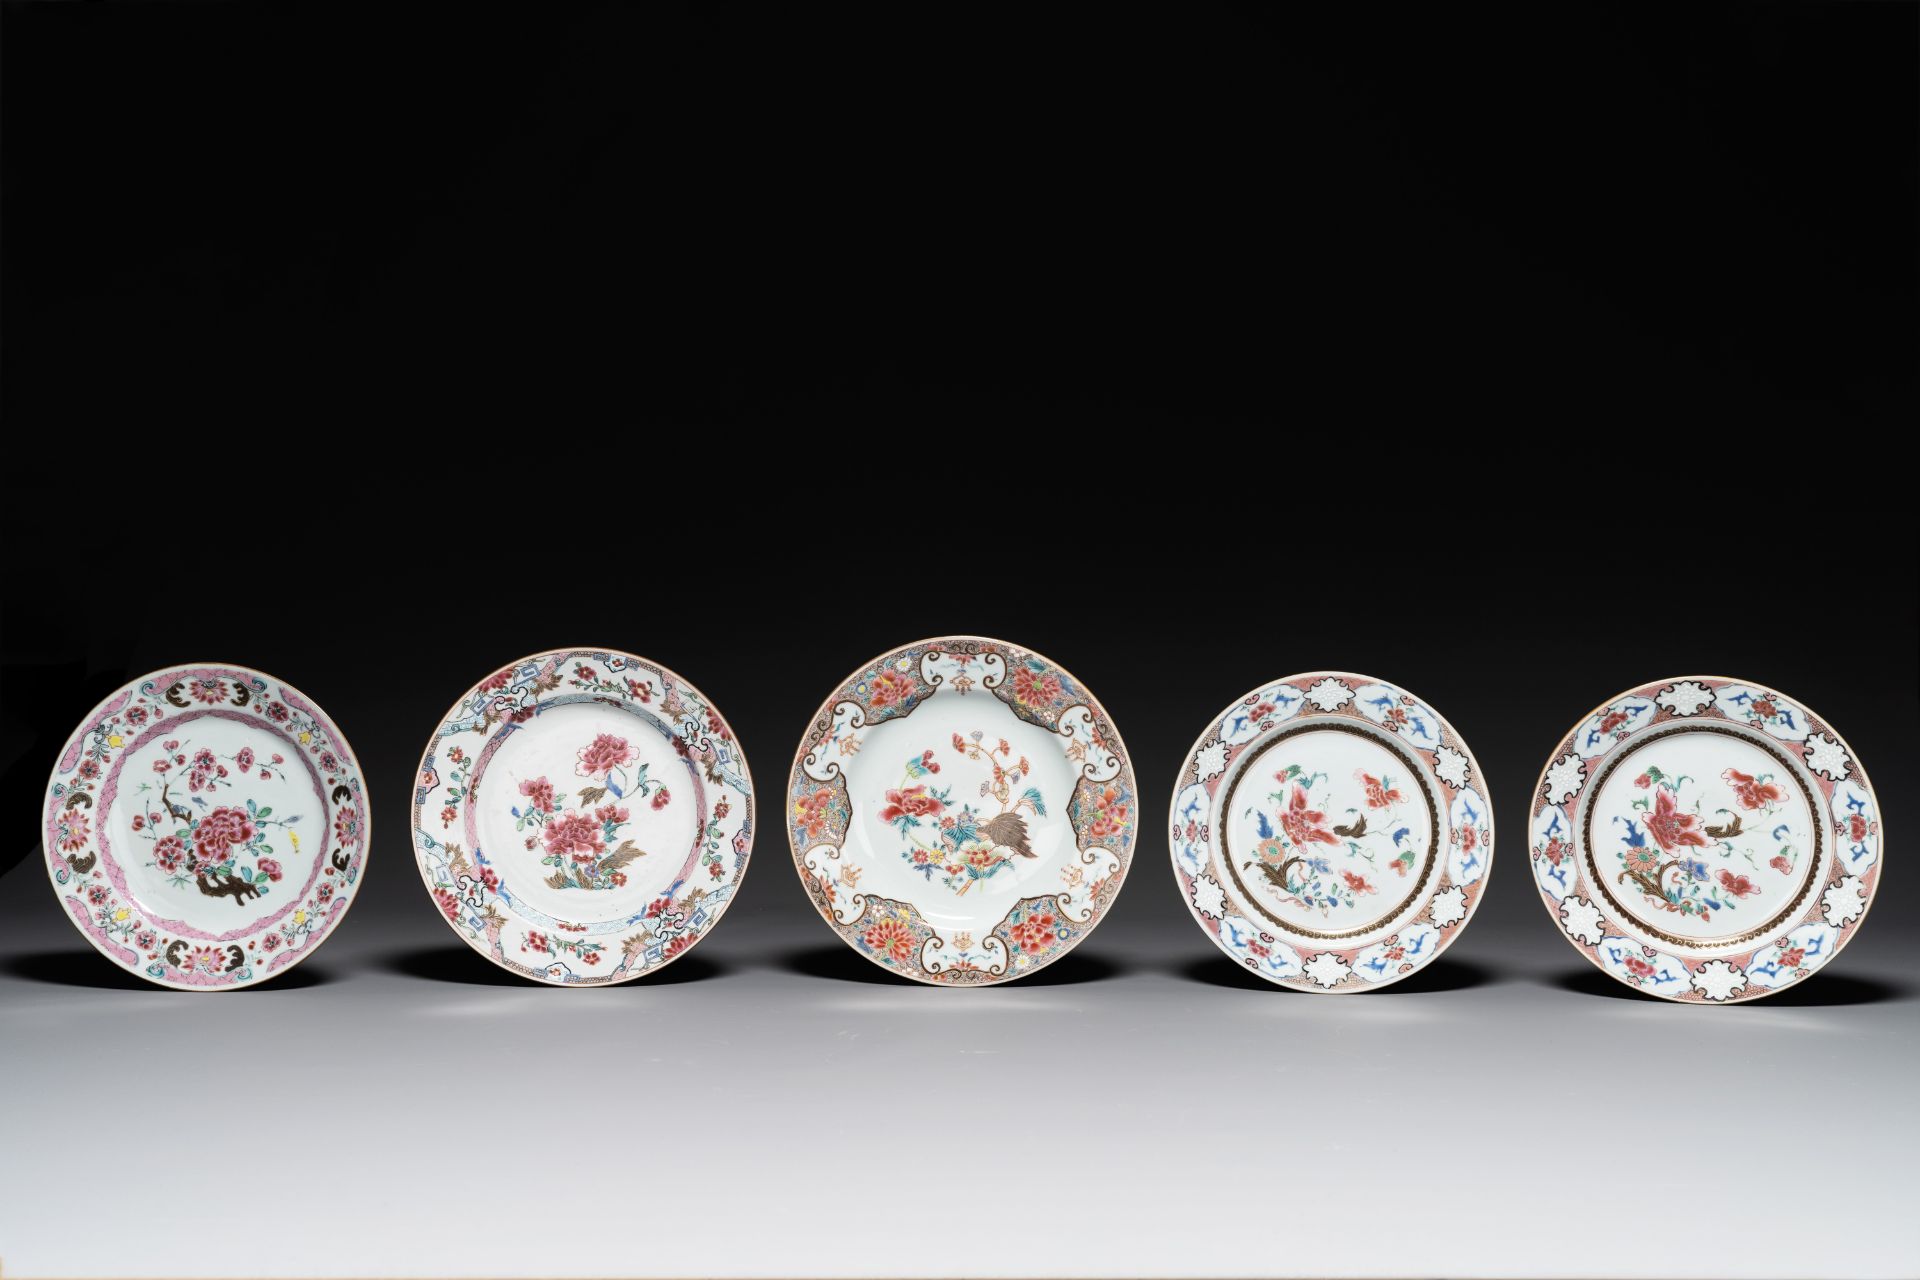 Five Chinese famille rose plates with floral decor, Yongzheng/Qianlong